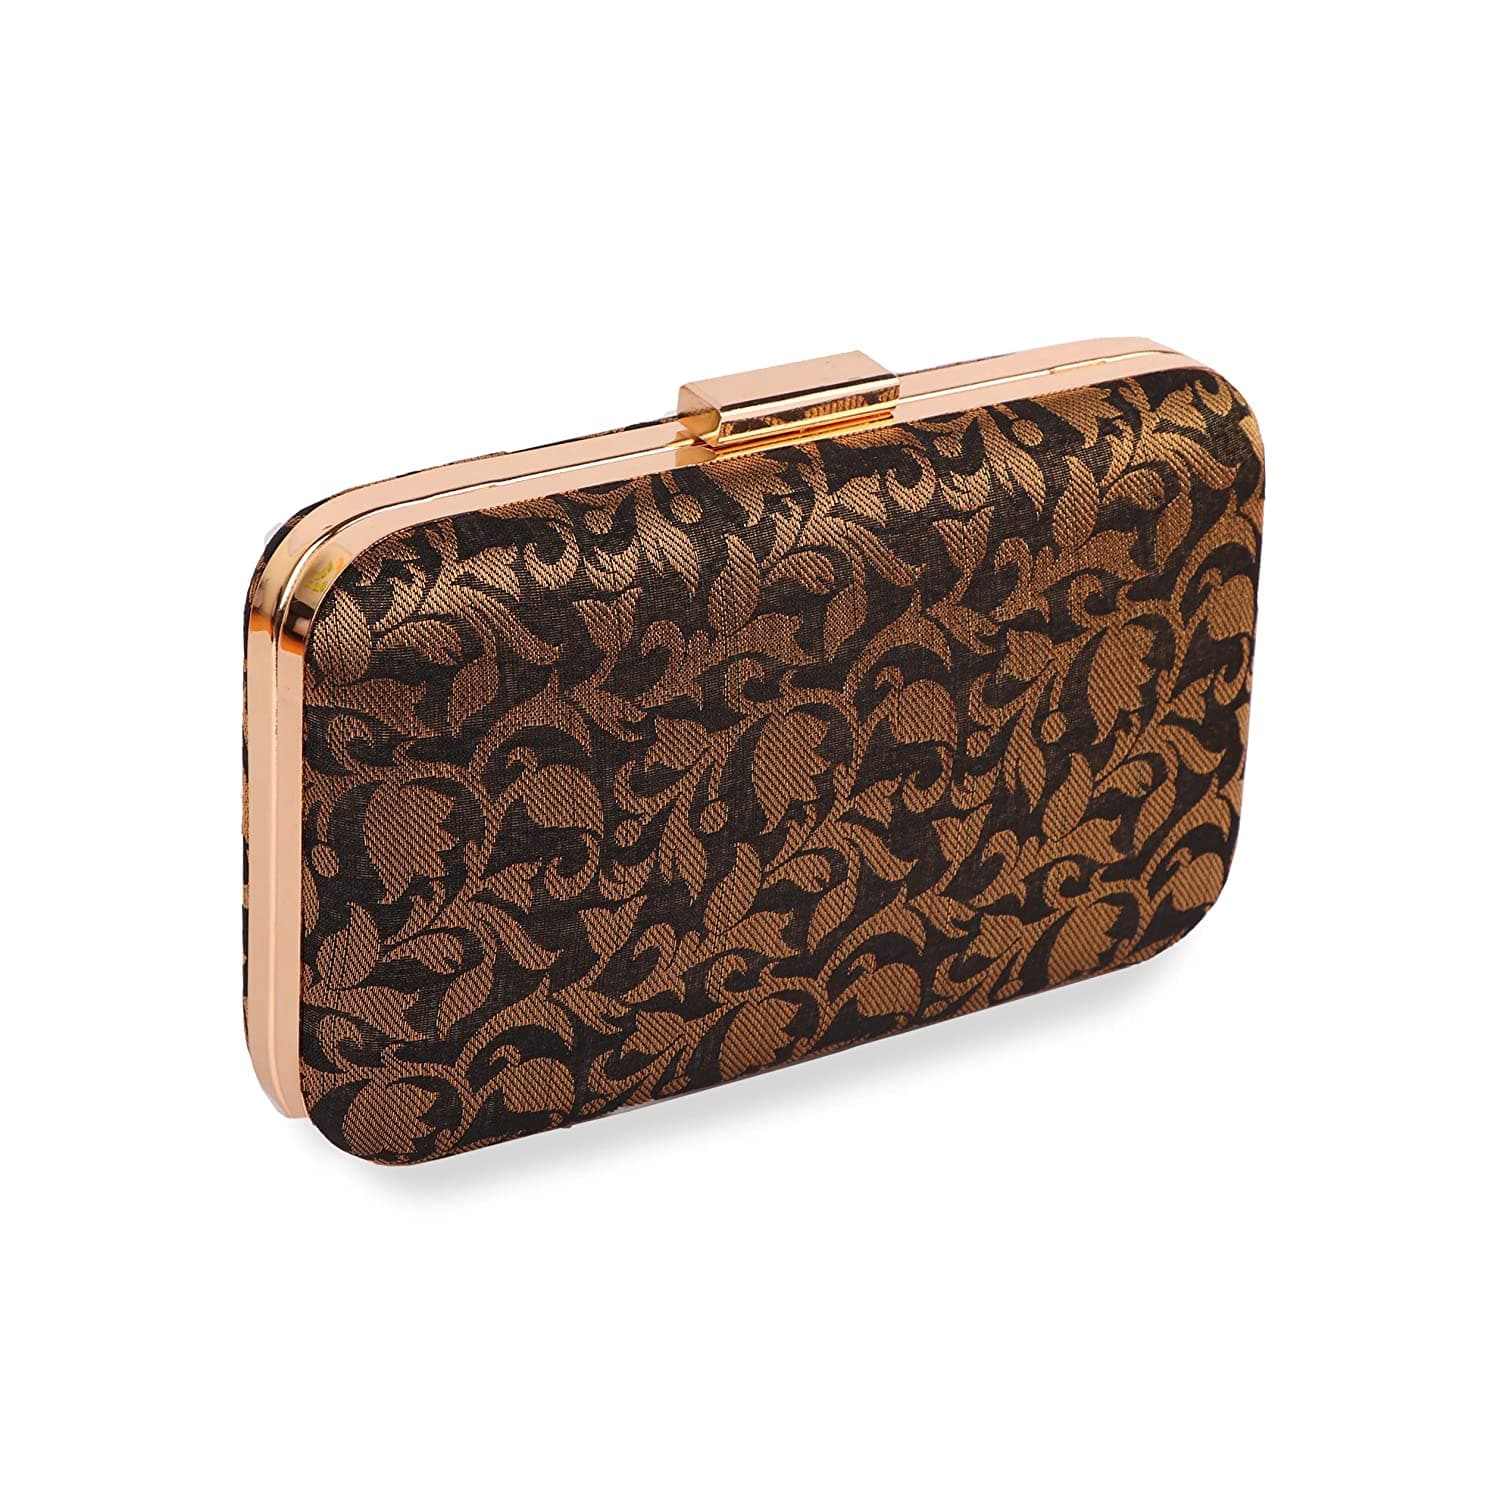 CHARMING TAILOR Leopard Clutch Bag for Women Tassel Foldover Clutch Faux  Suede Dressy Purse for Day to Evening (Brown): Handbags: Amazon.com